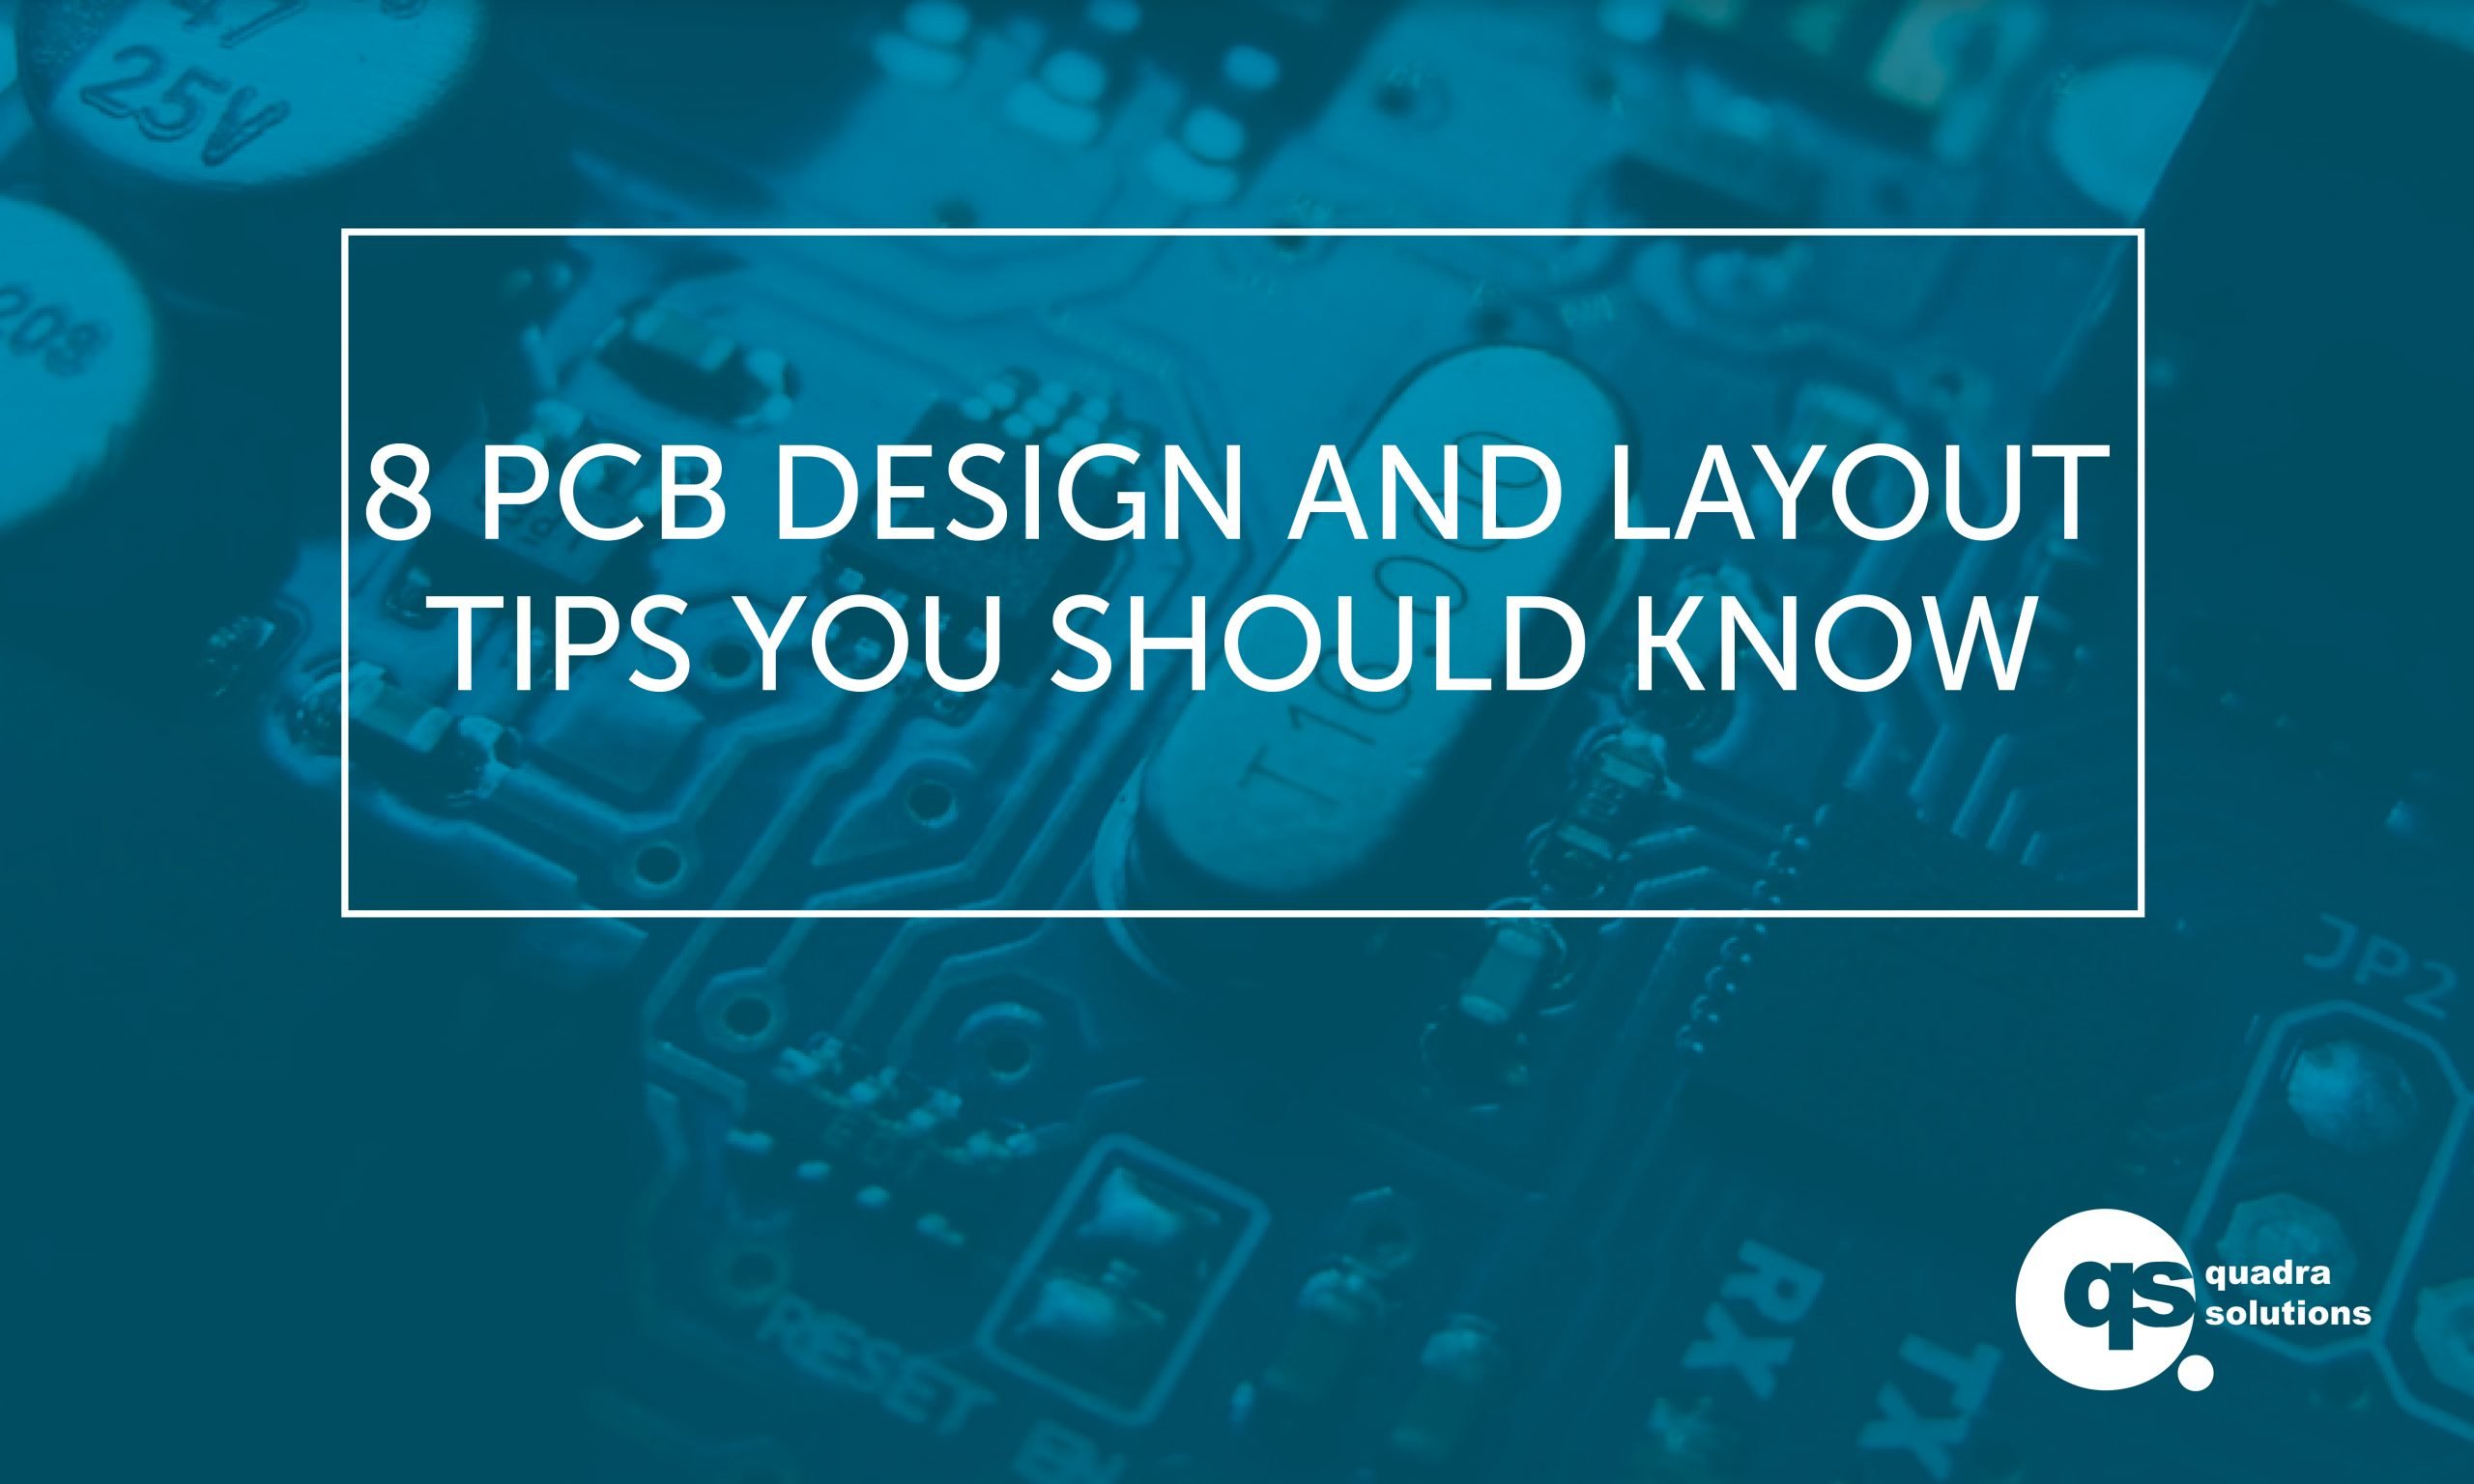 8 PCB Design and Layout Tips You Should Know